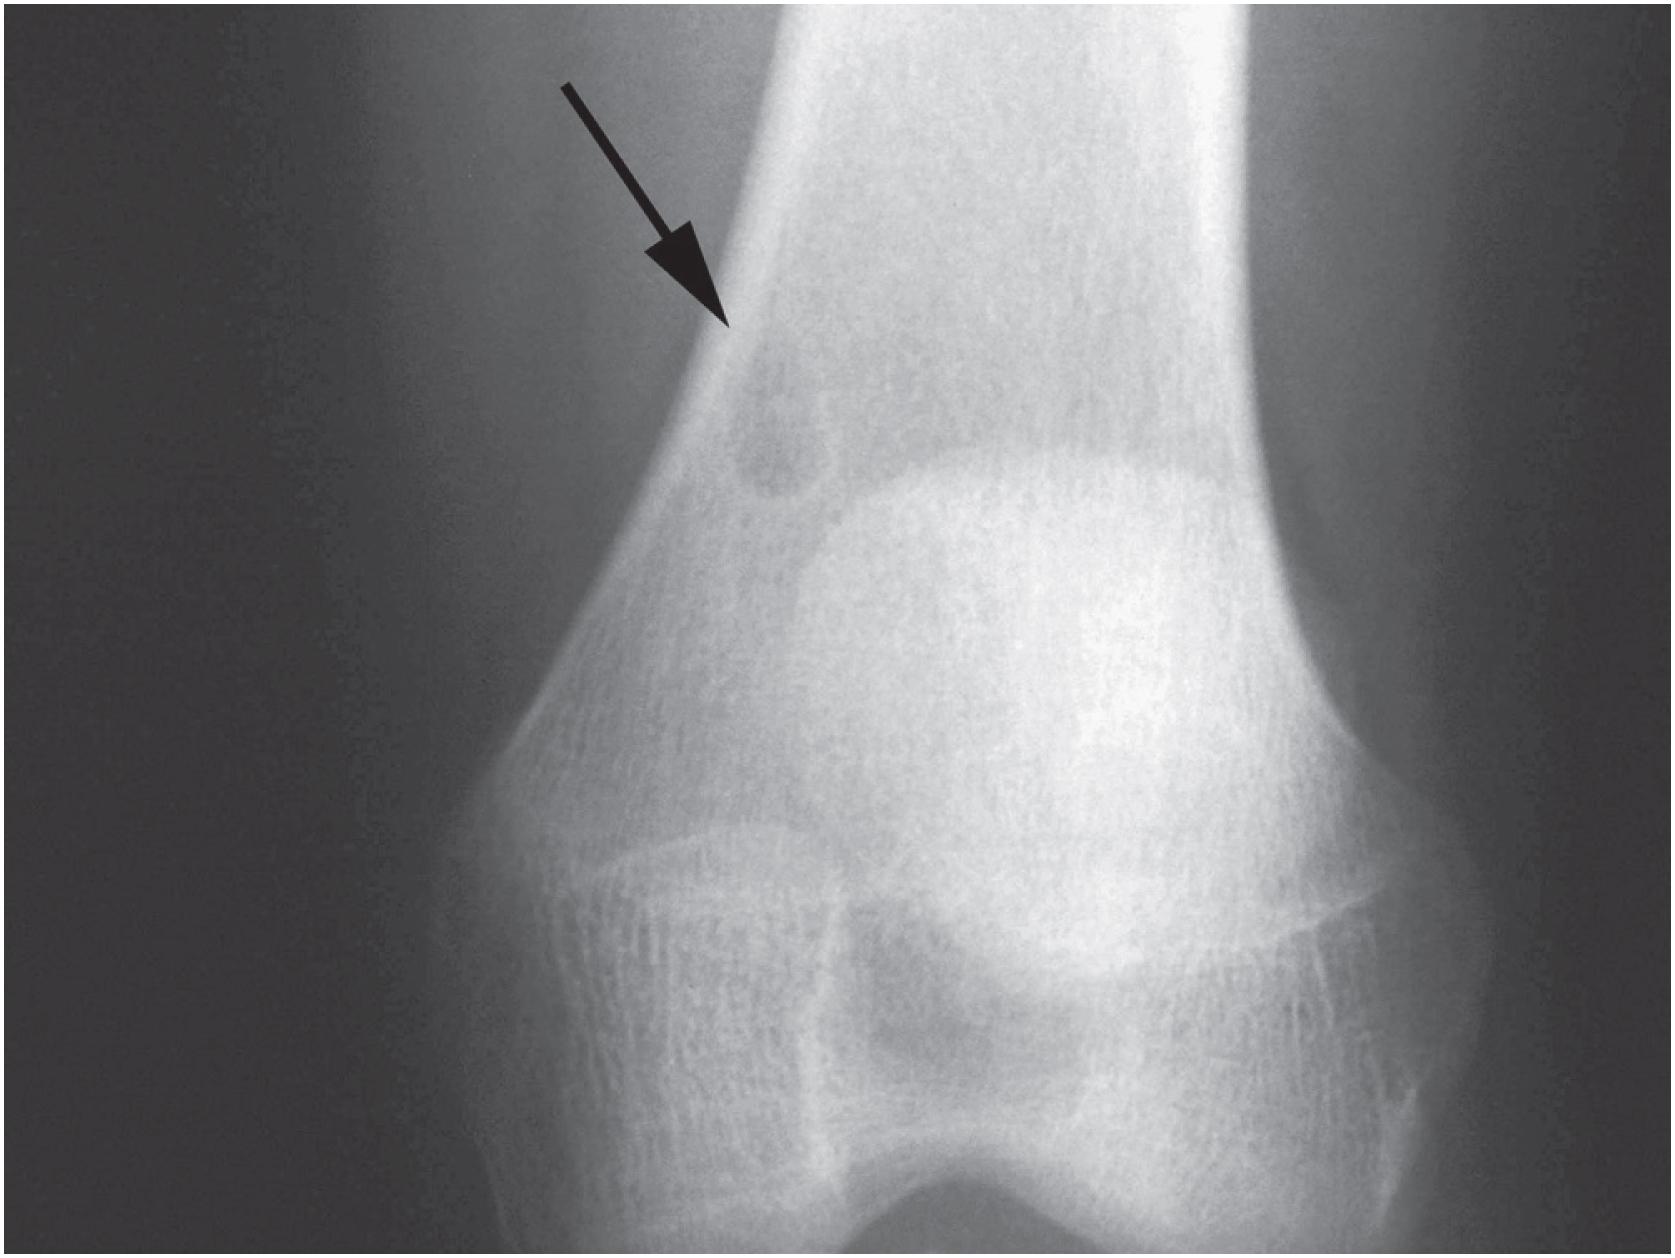 Fig. 18.3, Non-ossifying fibroma: radiographic appearance. Small radiolytic lesions in the metaphysis are also known as fibrous cortical defects (arrow).